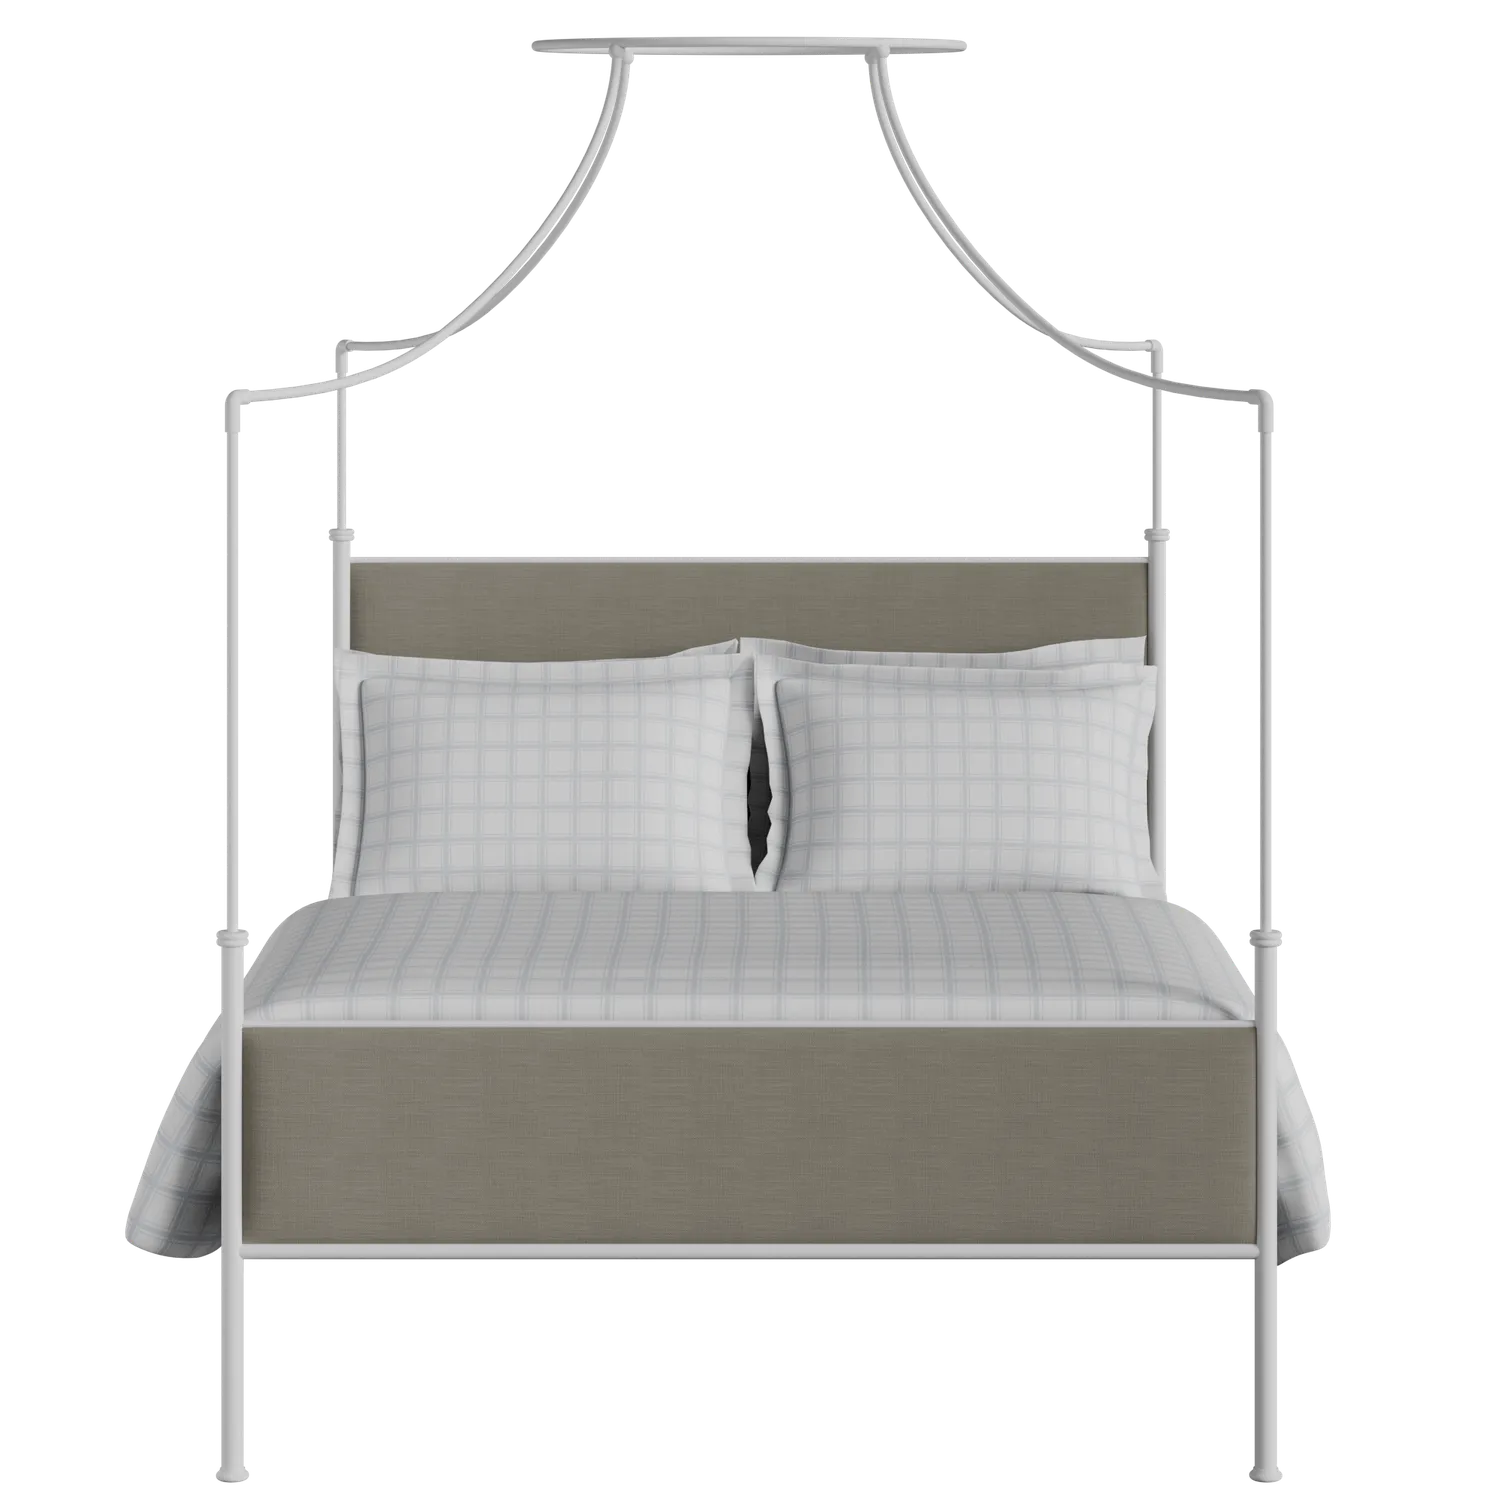 Waterloo iron/metal upholstered bed in white with grey fabric